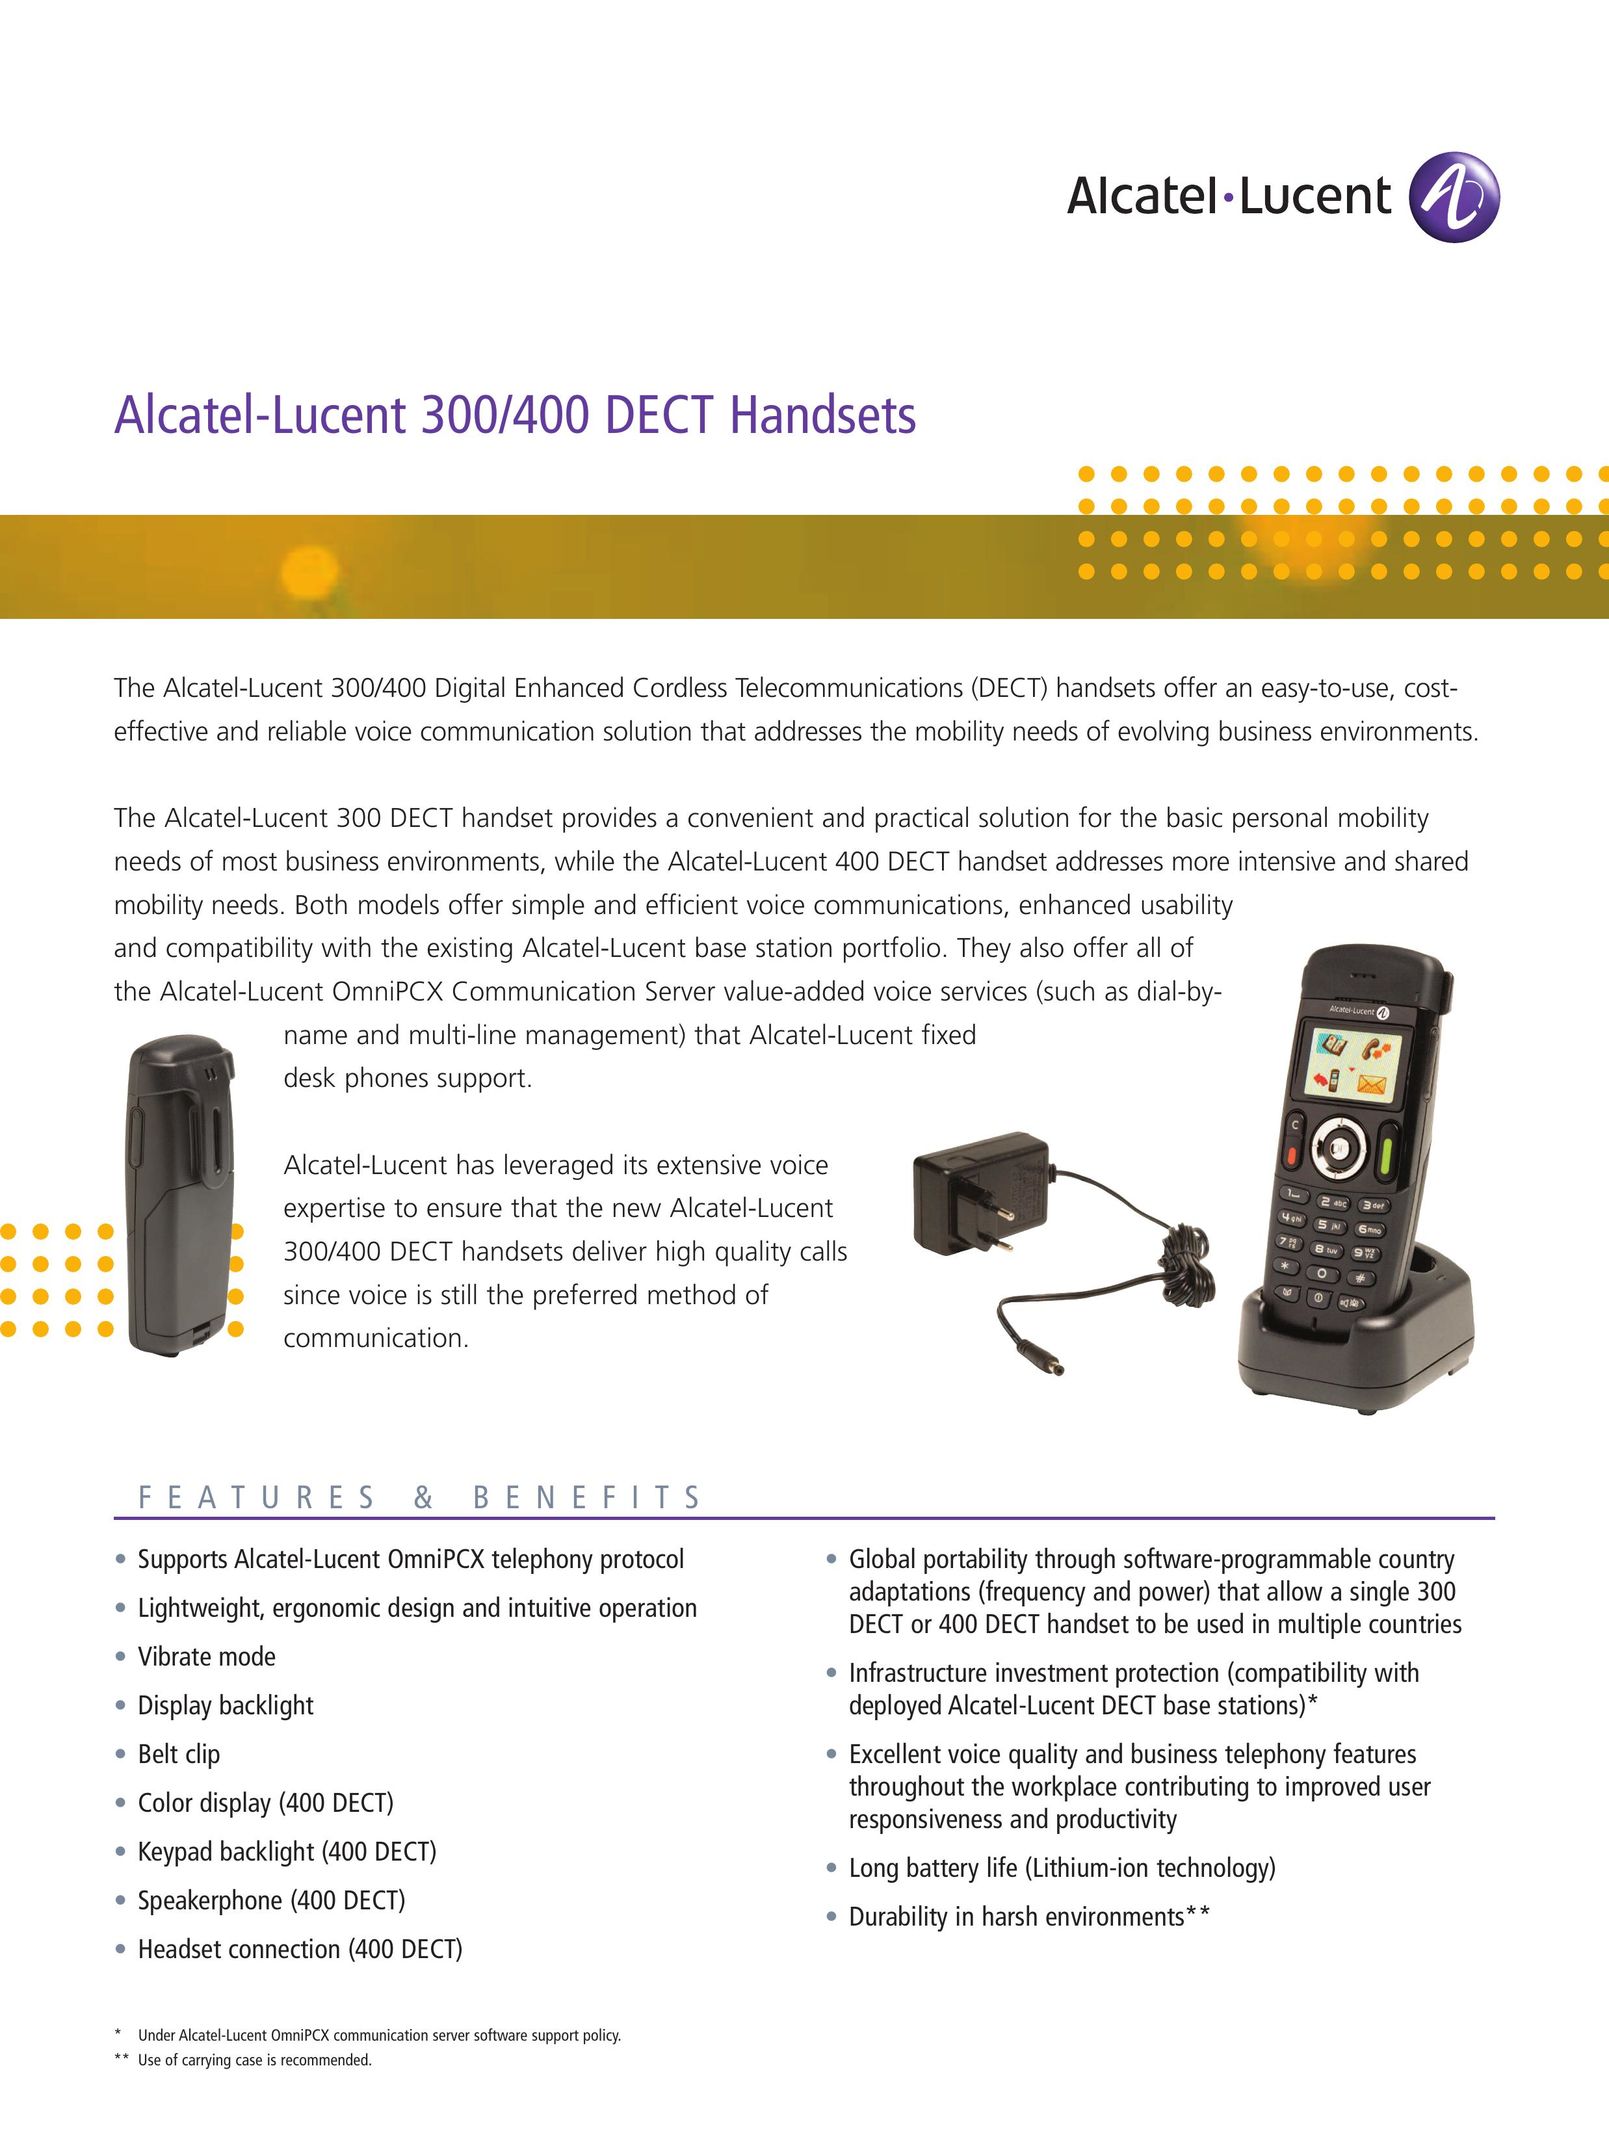 Alcatel-Lucent 400 Cordless Telephone User Manual